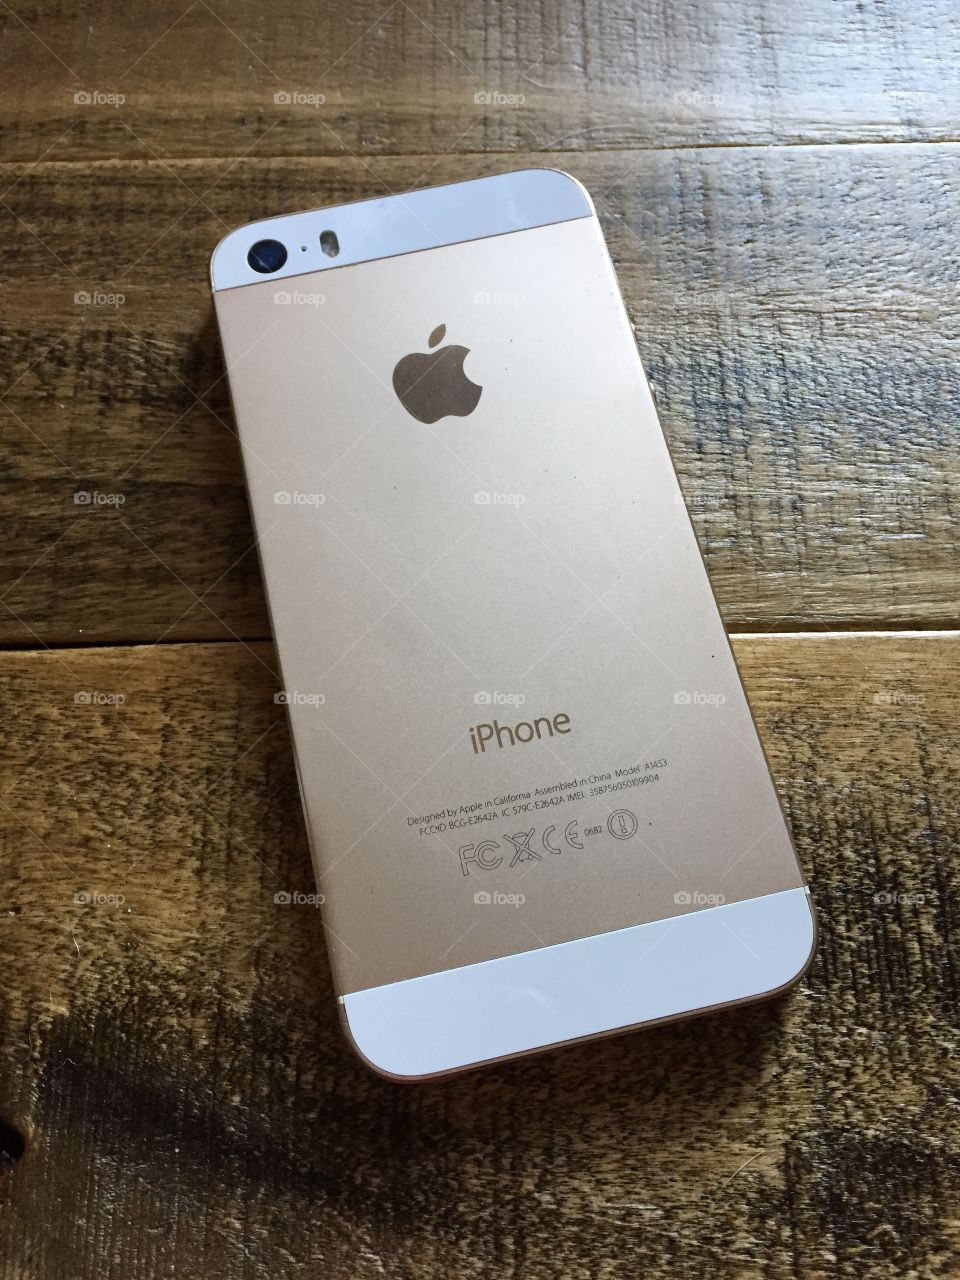 Gold iPhone 5s - 32GB. Photo of a gold iPhone 5s, 32GB on a reclaimed wood table